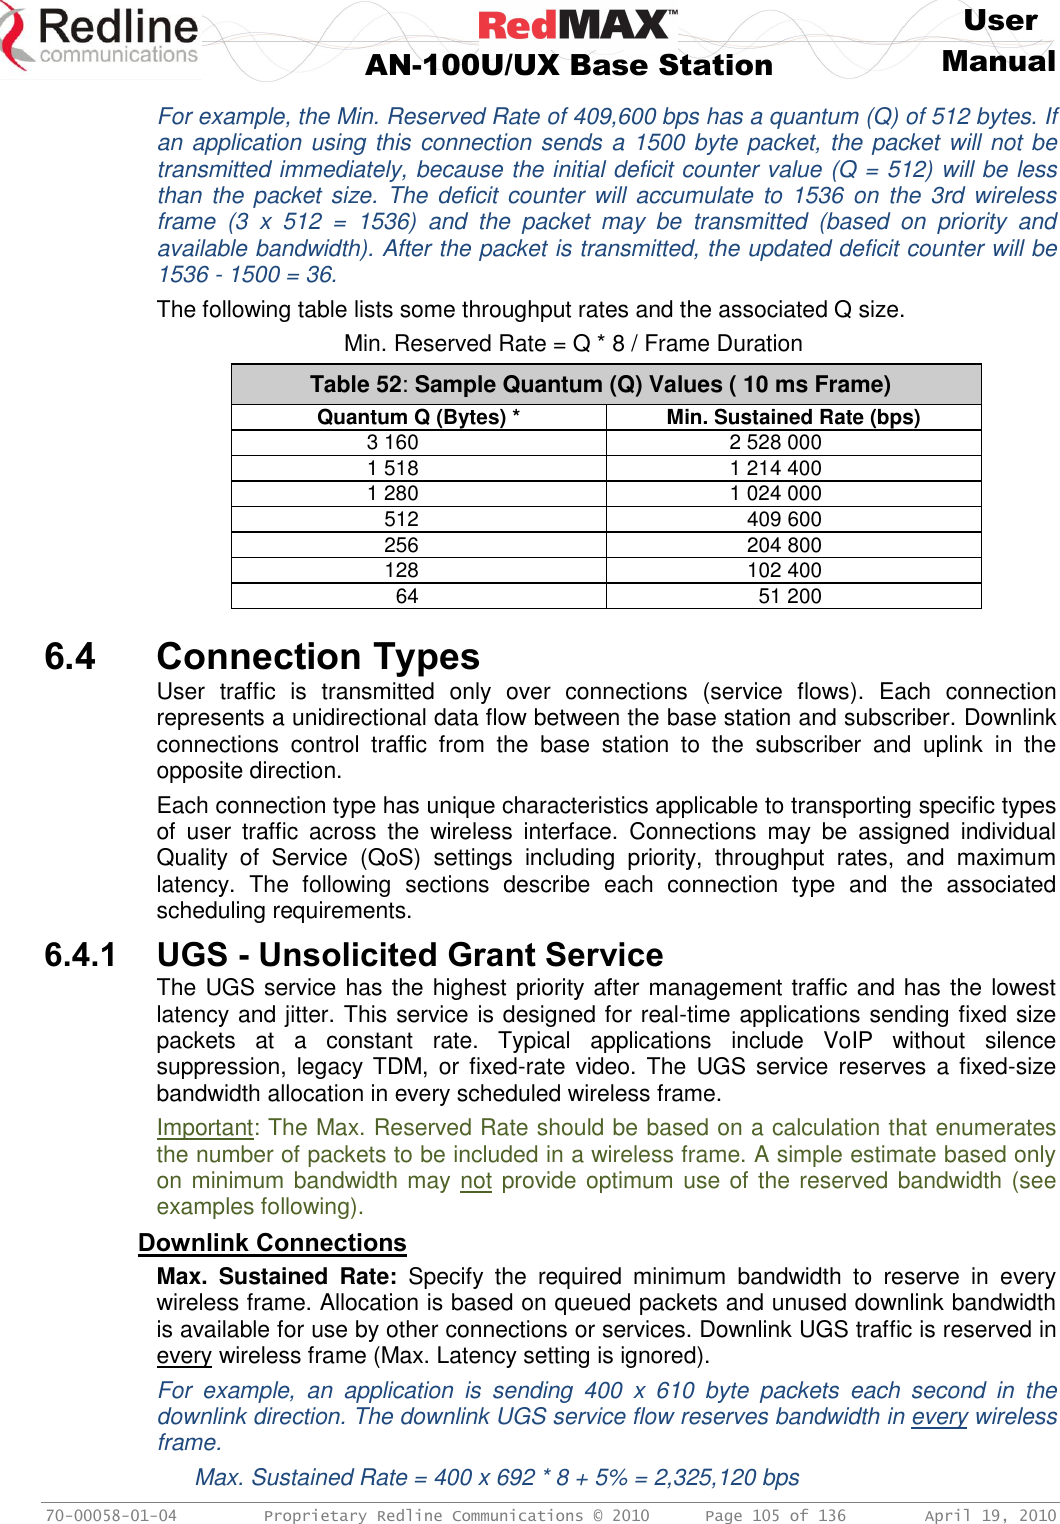     User  AN-100U/UX Base Station Manual   70-00058-01-04  Proprietary Redline Communications © 2010   Page 105 of 136  April 19, 2010 For example, the Min. Reserved Rate of 409,600 bps has a quantum (Q) of 512 bytes. If an application using this connection sends a 1500 byte packet, the packet will not be transmitted immediately, because the initial deficit counter value (Q = 512) will be less than the packet  size. The deficit  counter will accumulate  to 1536  on  the  3rd  wireless frame  (3  x  512  =  1536)  and  the  packet  may  be  transmitted  (based  on  priority  and available bandwidth). After the packet is transmitted, the updated deficit counter will be 1536 - 1500 = 36. The following table lists some throughput rates and the associated Q size.   Min. Reserved Rate = Q * 8 / Frame Duration Table 52: Sample Quantum (Q) Values ( 10 ms Frame) Quantum Q (Bytes) * Min. Sustained Rate (bps)   3 160   2 528 000   1 518   1 214 400   1 280   1 024 000  512   409 600  256   204 800  128   102 400  64   51 200   6.4 Connection Types User  traffic  is  transmitted  only  over  connections  (service  flows).  Each  connection represents a unidirectional data flow between the base station and subscriber. Downlink connections  control  traffic  from  the  base  station  to  the  subscriber  and  uplink  in  the opposite direction.  Each connection type has unique characteristics applicable to transporting specific types of  user  traffic  across  the  wireless  interface.  Connections  may  be  assigned  individual Quality  of  Service  (QoS)  settings  including  priority,  throughput  rates,  and  maximum latency.  The  following  sections  describe  each  connection  type  and  the  associated scheduling requirements.  6.4.1 UGS - Unsolicited Grant Service The UGS service has the highest priority after management traffic and has the lowest latency and jitter. This service is designed for real-time applications sending fixed size packets  at  a  constant  rate.  Typical  applications  include  VoIP  without  silence suppression, legacy  TDM, or  fixed-rate  video. The  UGS service  reserves a  fixed-size bandwidth allocation in every scheduled wireless frame.  Important: The Max. Reserved Rate should be based on a calculation that enumerates the number of packets to be included in a wireless frame. A simple estimate based only on minimum bandwidth may not provide optimum use of the reserved bandwidth (see examples following). Downlink Connections Max.  Sustained  Rate:  Specify  the  required  minimum  bandwidth  to  reserve  in  every wireless frame. Allocation is based on queued packets and unused downlink bandwidth is available for use by other connections or services. Downlink UGS traffic is reserved in every wireless frame (Max. Latency setting is ignored). For  example,  an  application  is  sending  400  x  610  byte  packets  each  second  in  the downlink direction. The downlink UGS service flow reserves bandwidth in every wireless frame.   Max. Sustained Rate = 400 x 692 * 8 + 5% = 2,325,120 bps 